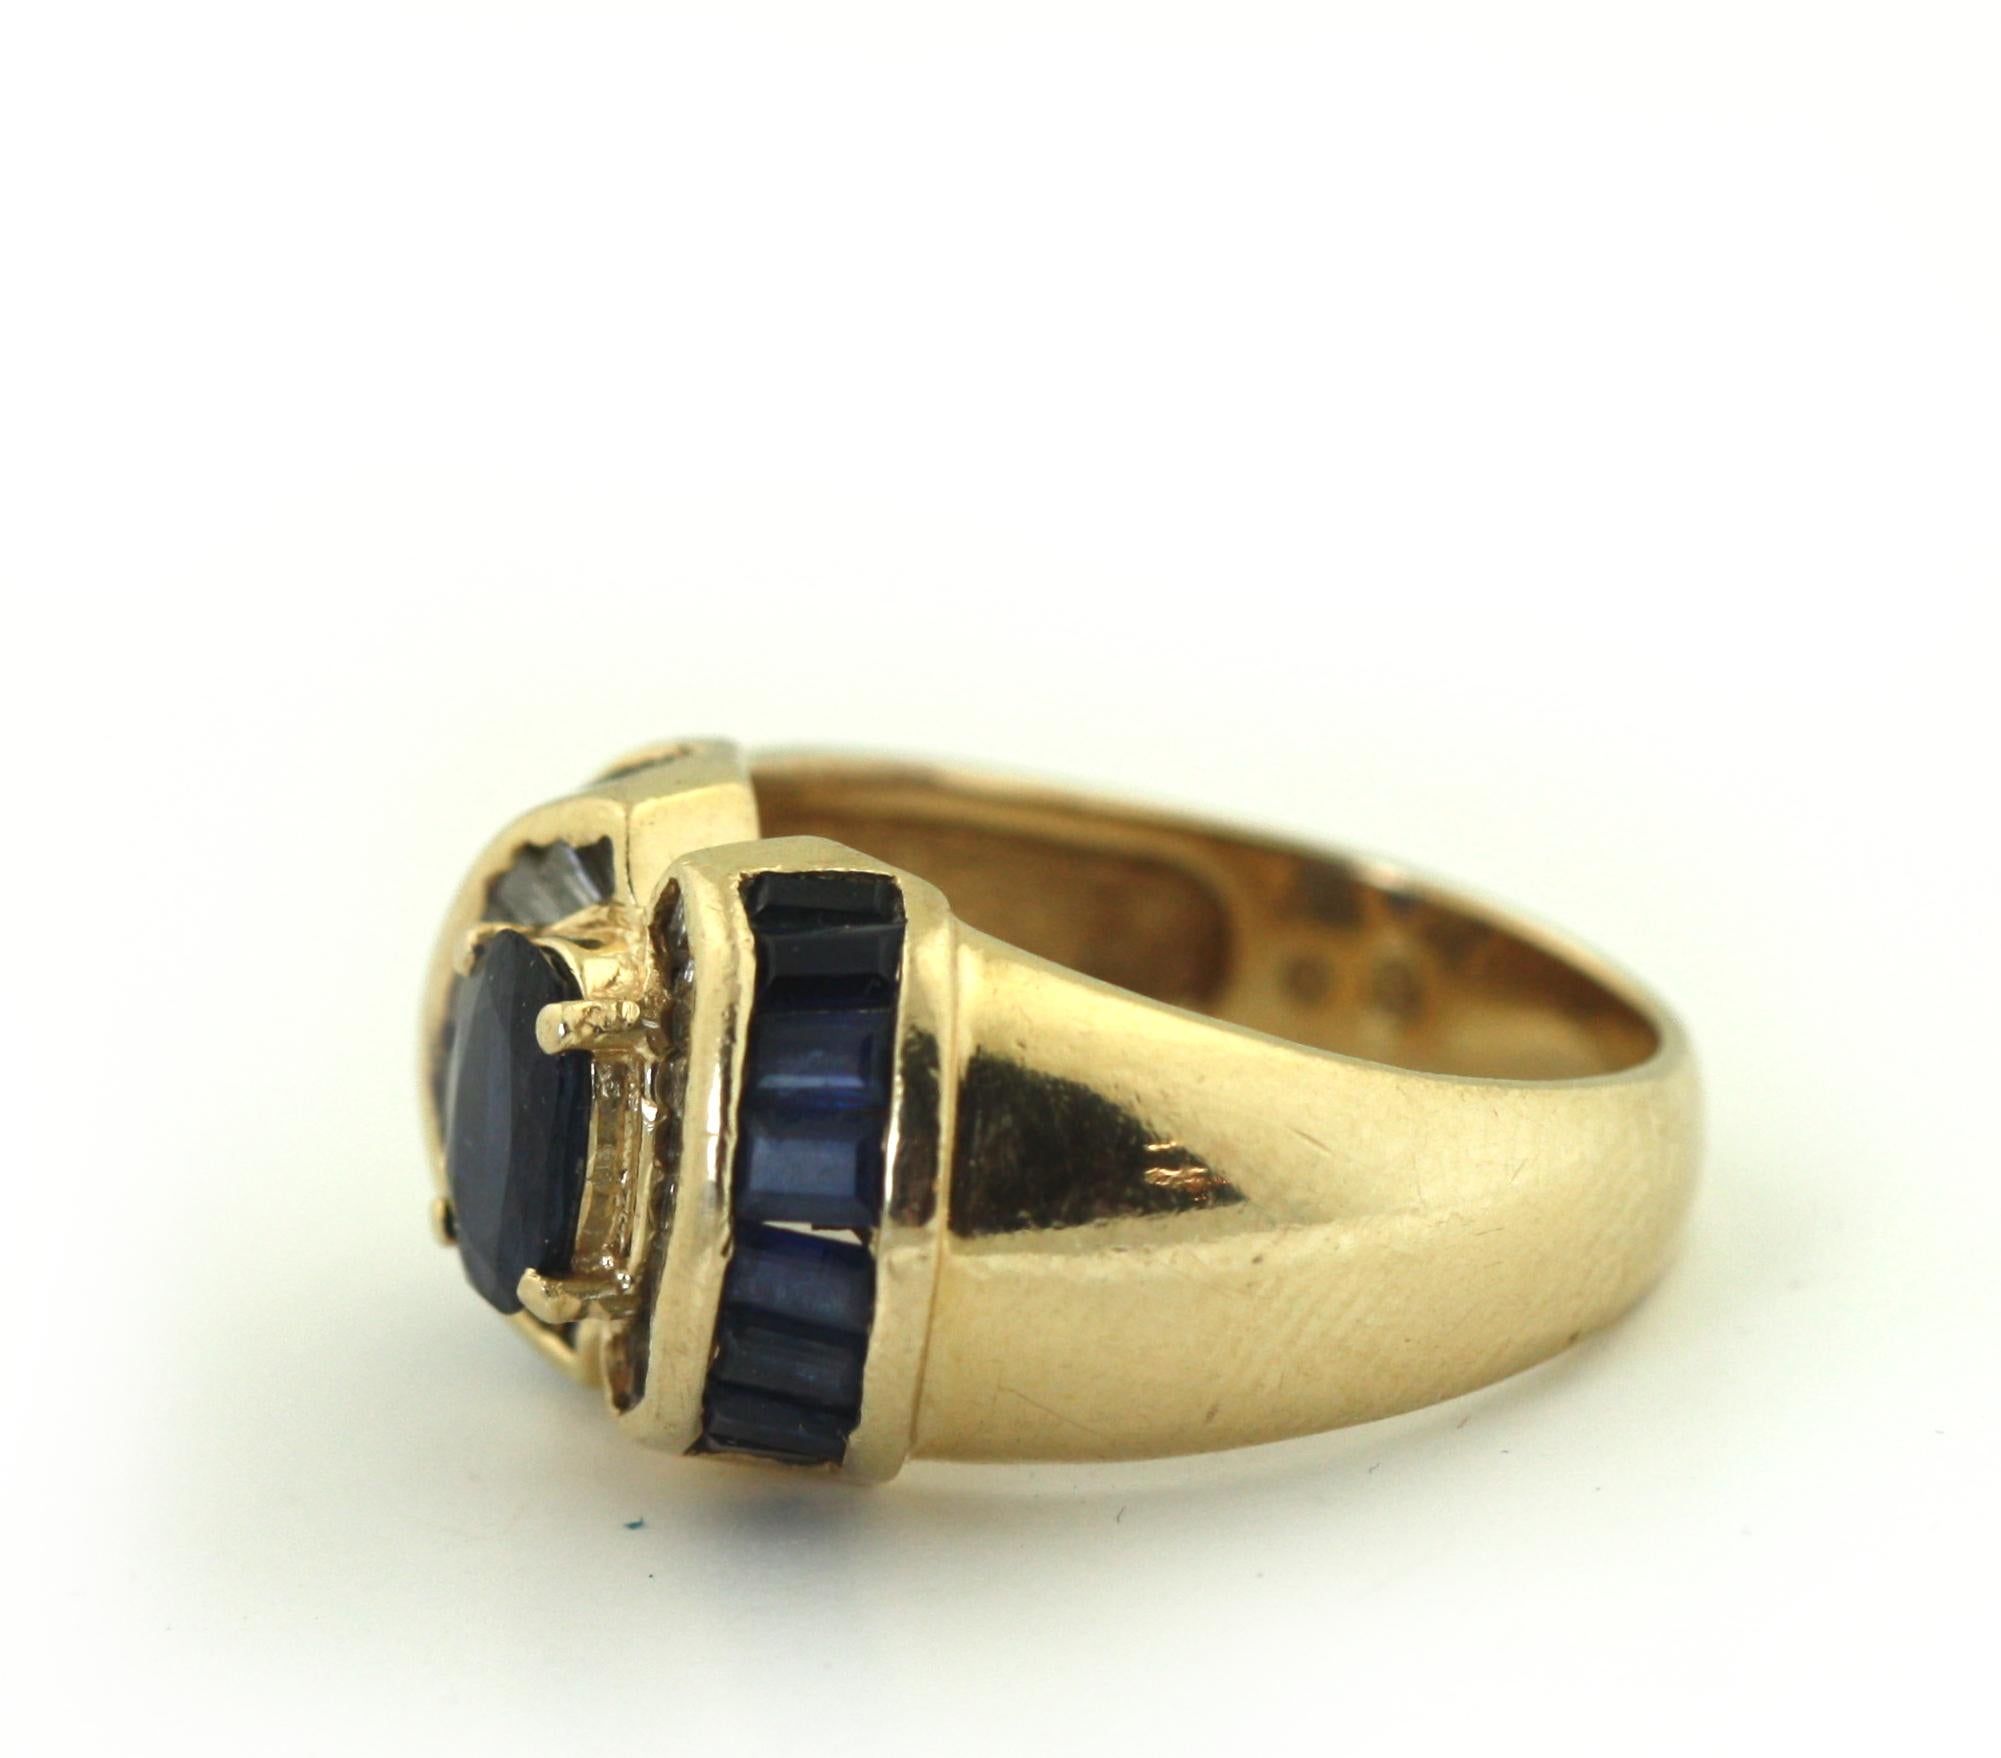 
14 Karat Gold and Colored Stone Ring
Centering an oval-shaped sapphire, flanked by baguette cut diamonds, size 6, with partial maker's marks, gross weight 6 grams
